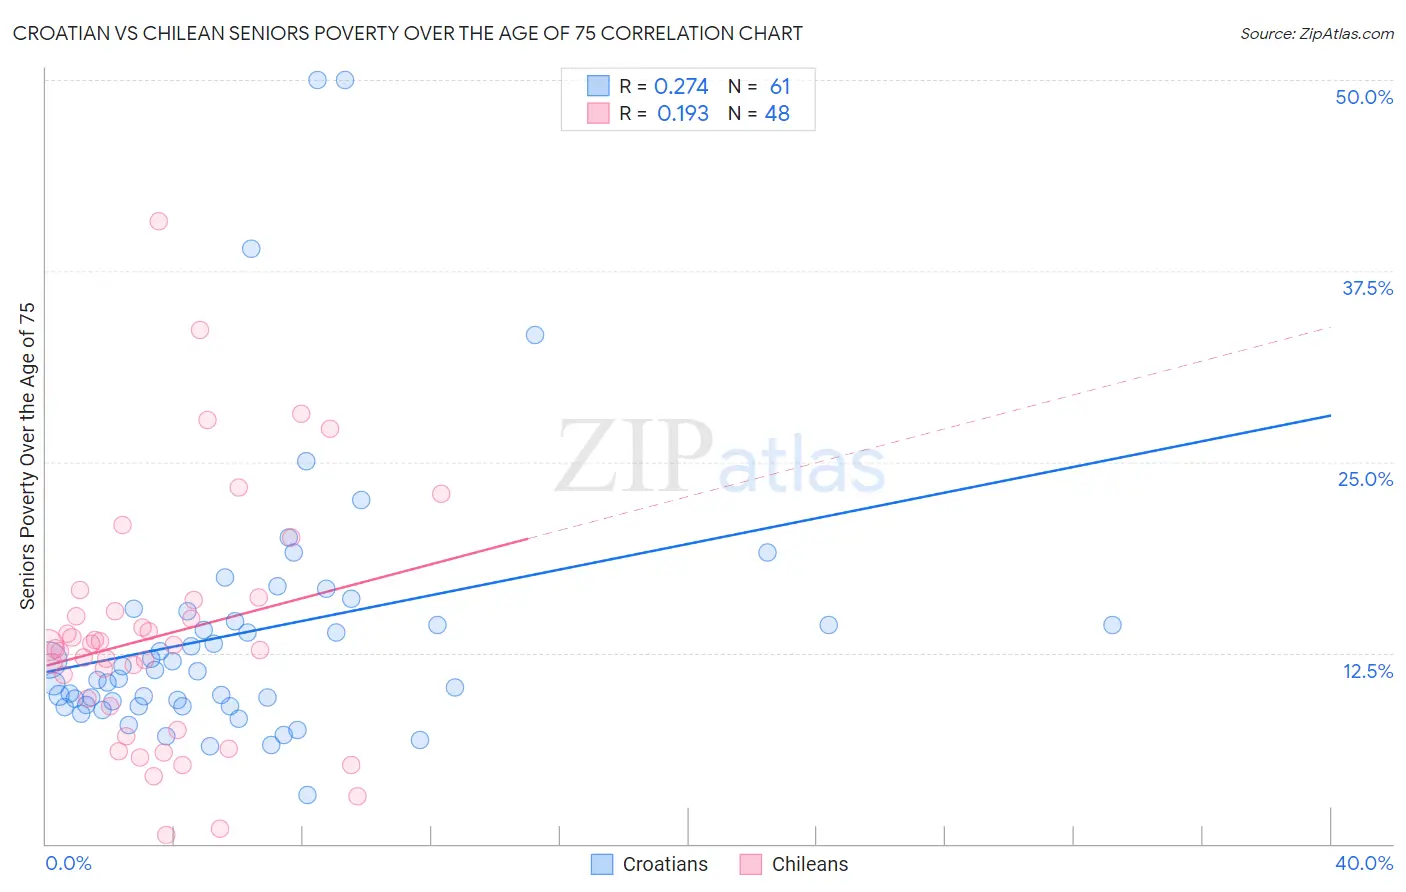 Croatian vs Chilean Seniors Poverty Over the Age of 75